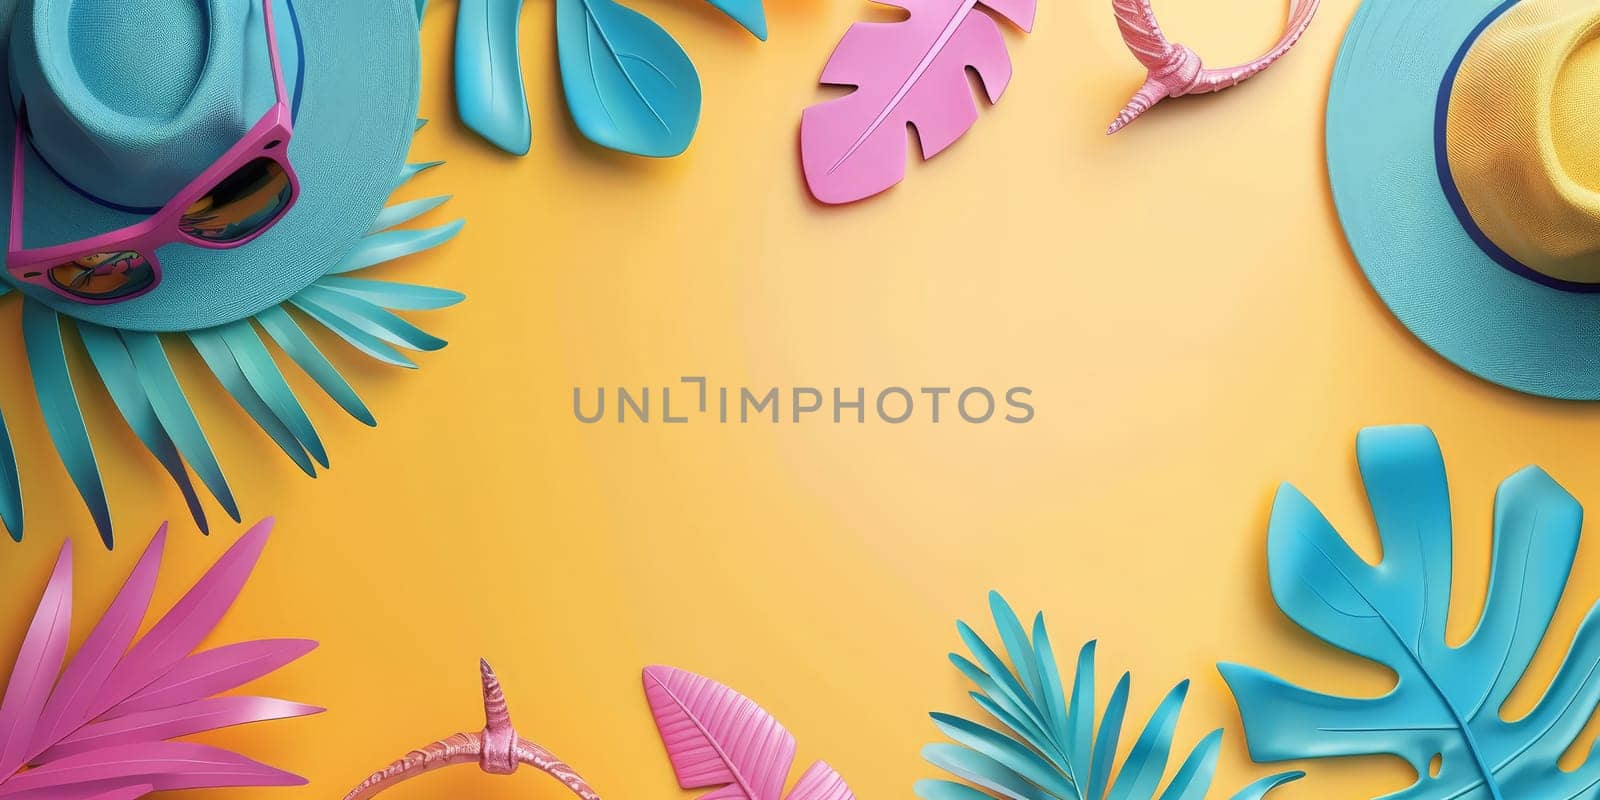 A colorful tropical scene with a yellow background and a variety of hats and sunglasses. The hats and sunglasses are scattered throughout the image, with some placed on the ground